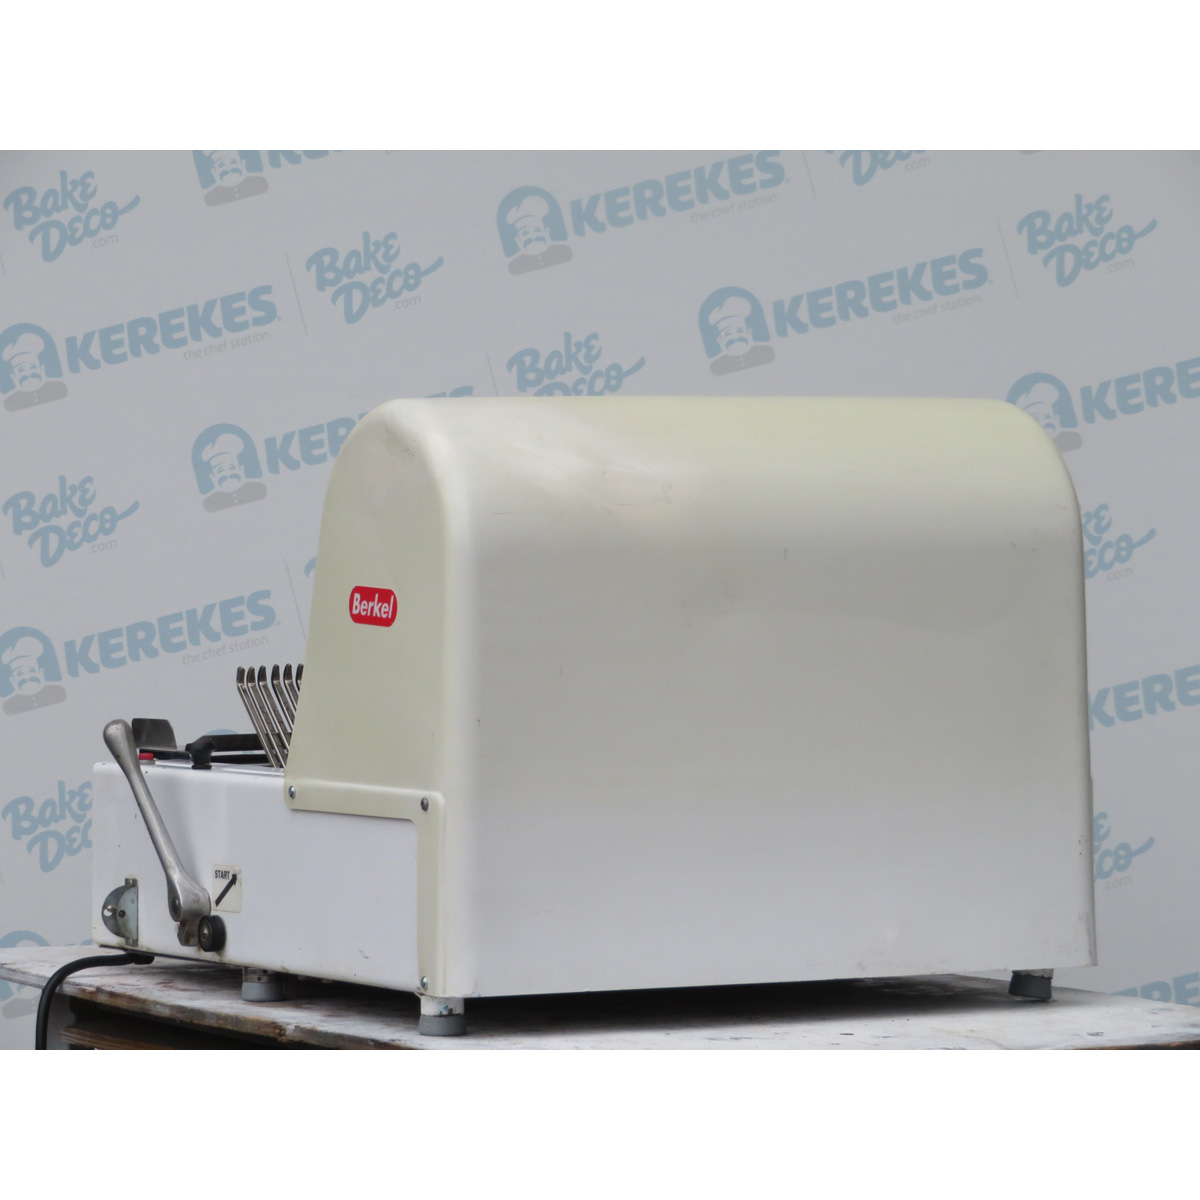 Berkel MB-7/16 Bread Slicer, 7/16" Slice Thickness, Used Excellent Condition image 1